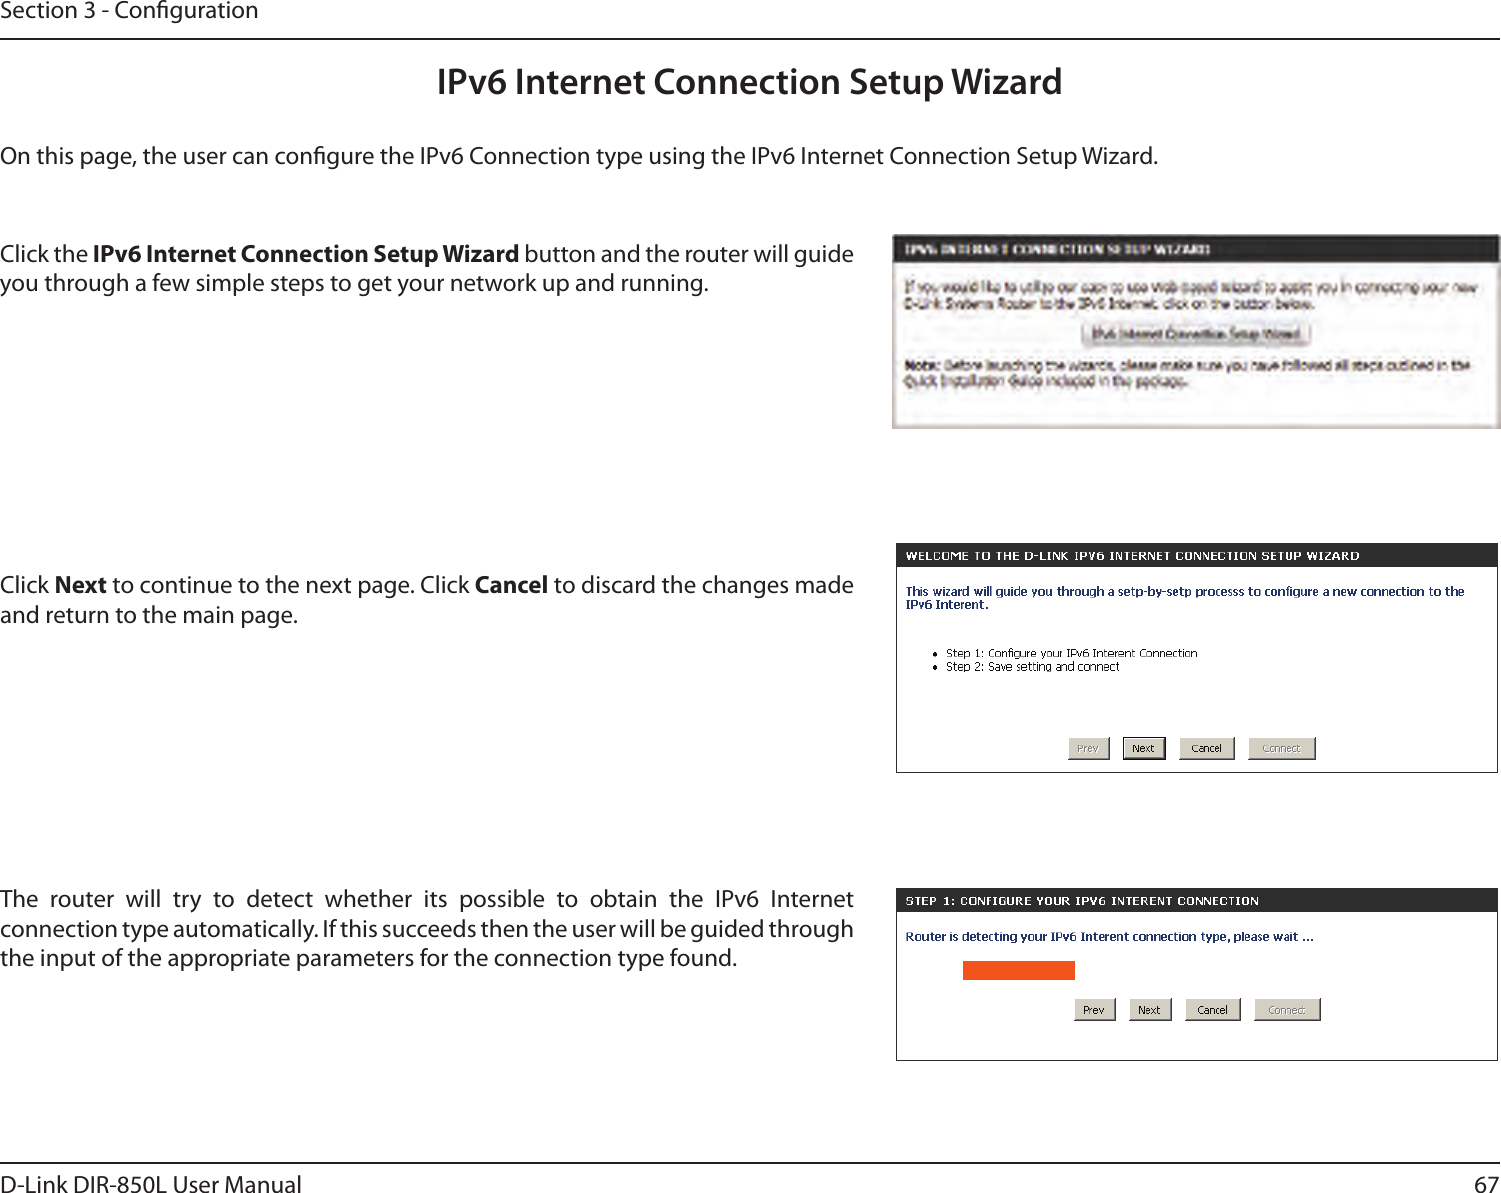 67D-Link DIR-850L User ManualSection 3 - CongurationIPv6 Internet Connection Setup WizardOn this page, the user can congure the IPv6 Connection type using the IPv6 Internet Connection Setup Wizard.Click the IPv6 Internet Connection Setup Wizard button and the router will guide you through a few simple steps to get your network up and running.Click Next to continue to the next page. Click Cancel to discard the changes made and return to the main page.The  router  will  try  to  detect  whether  its  possible  to  obtain  the  IPv6  Internet connection type automatically. If this succeeds then the user will be guided through the input of the appropriate parameters for the connection type found.